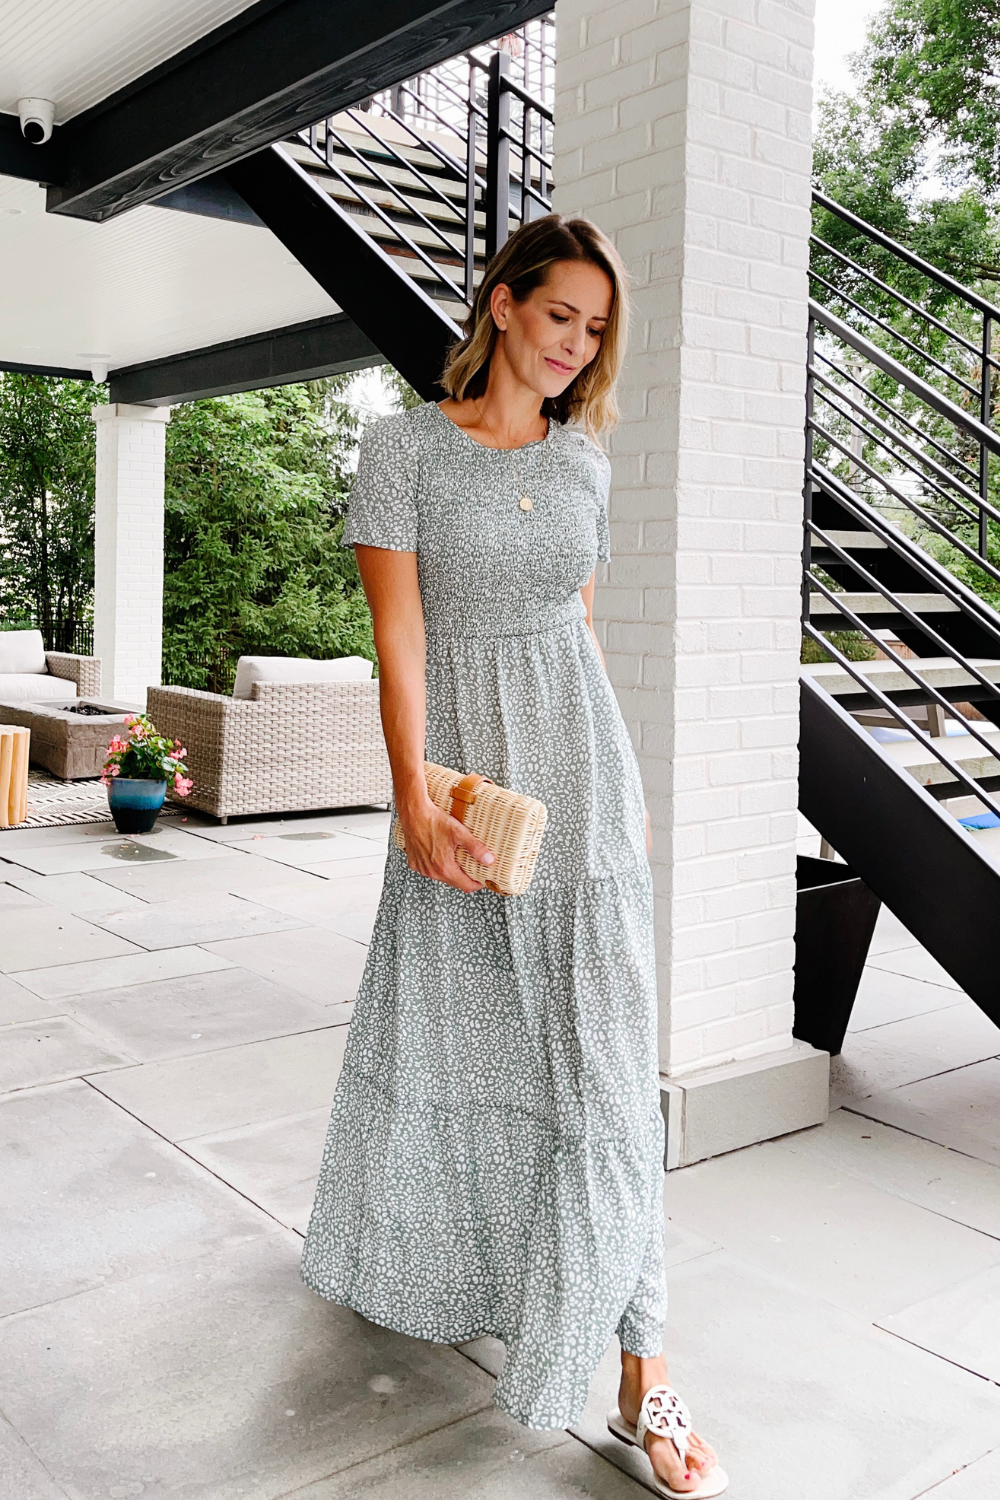 Suzanne wearing a maxi dress, ratan clutch, and sandals